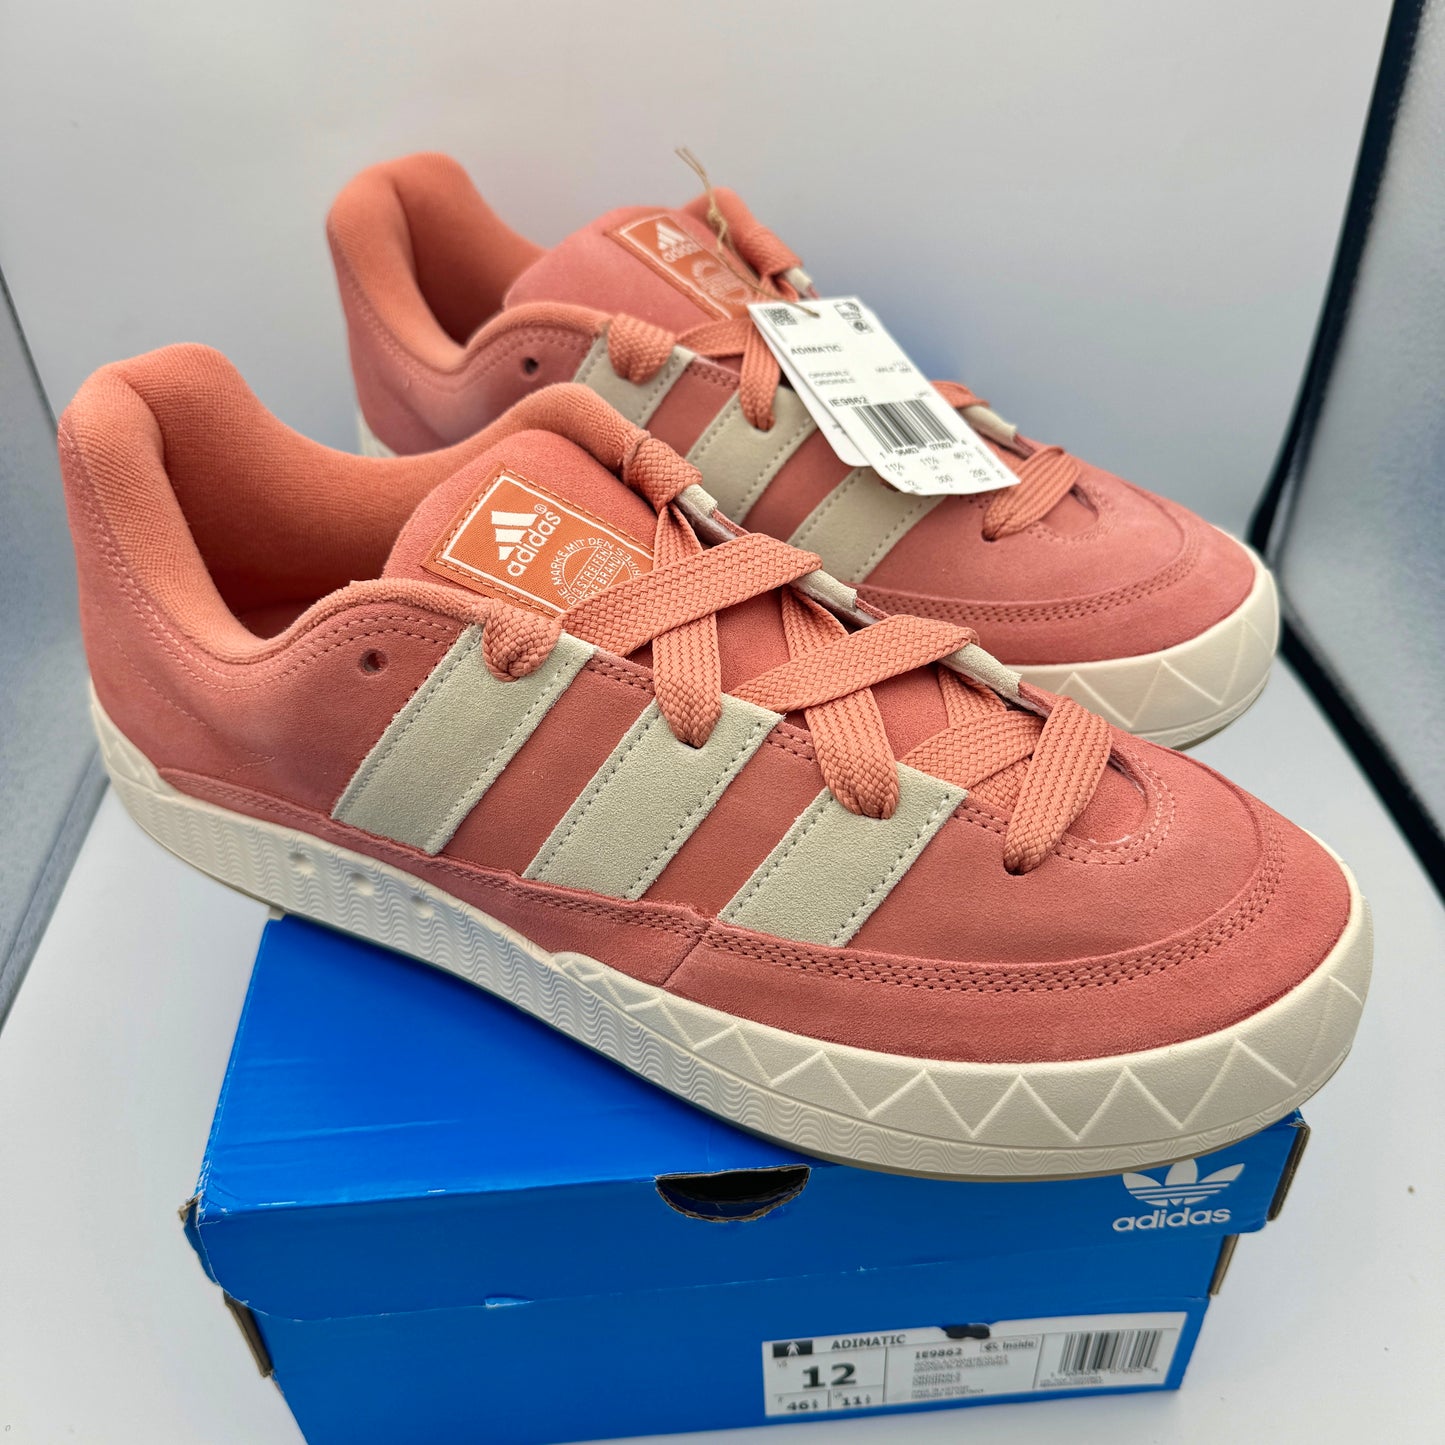 Adidas Originals Adimatic Sneakers Wonderclay Salmon Shoes Suede Leather